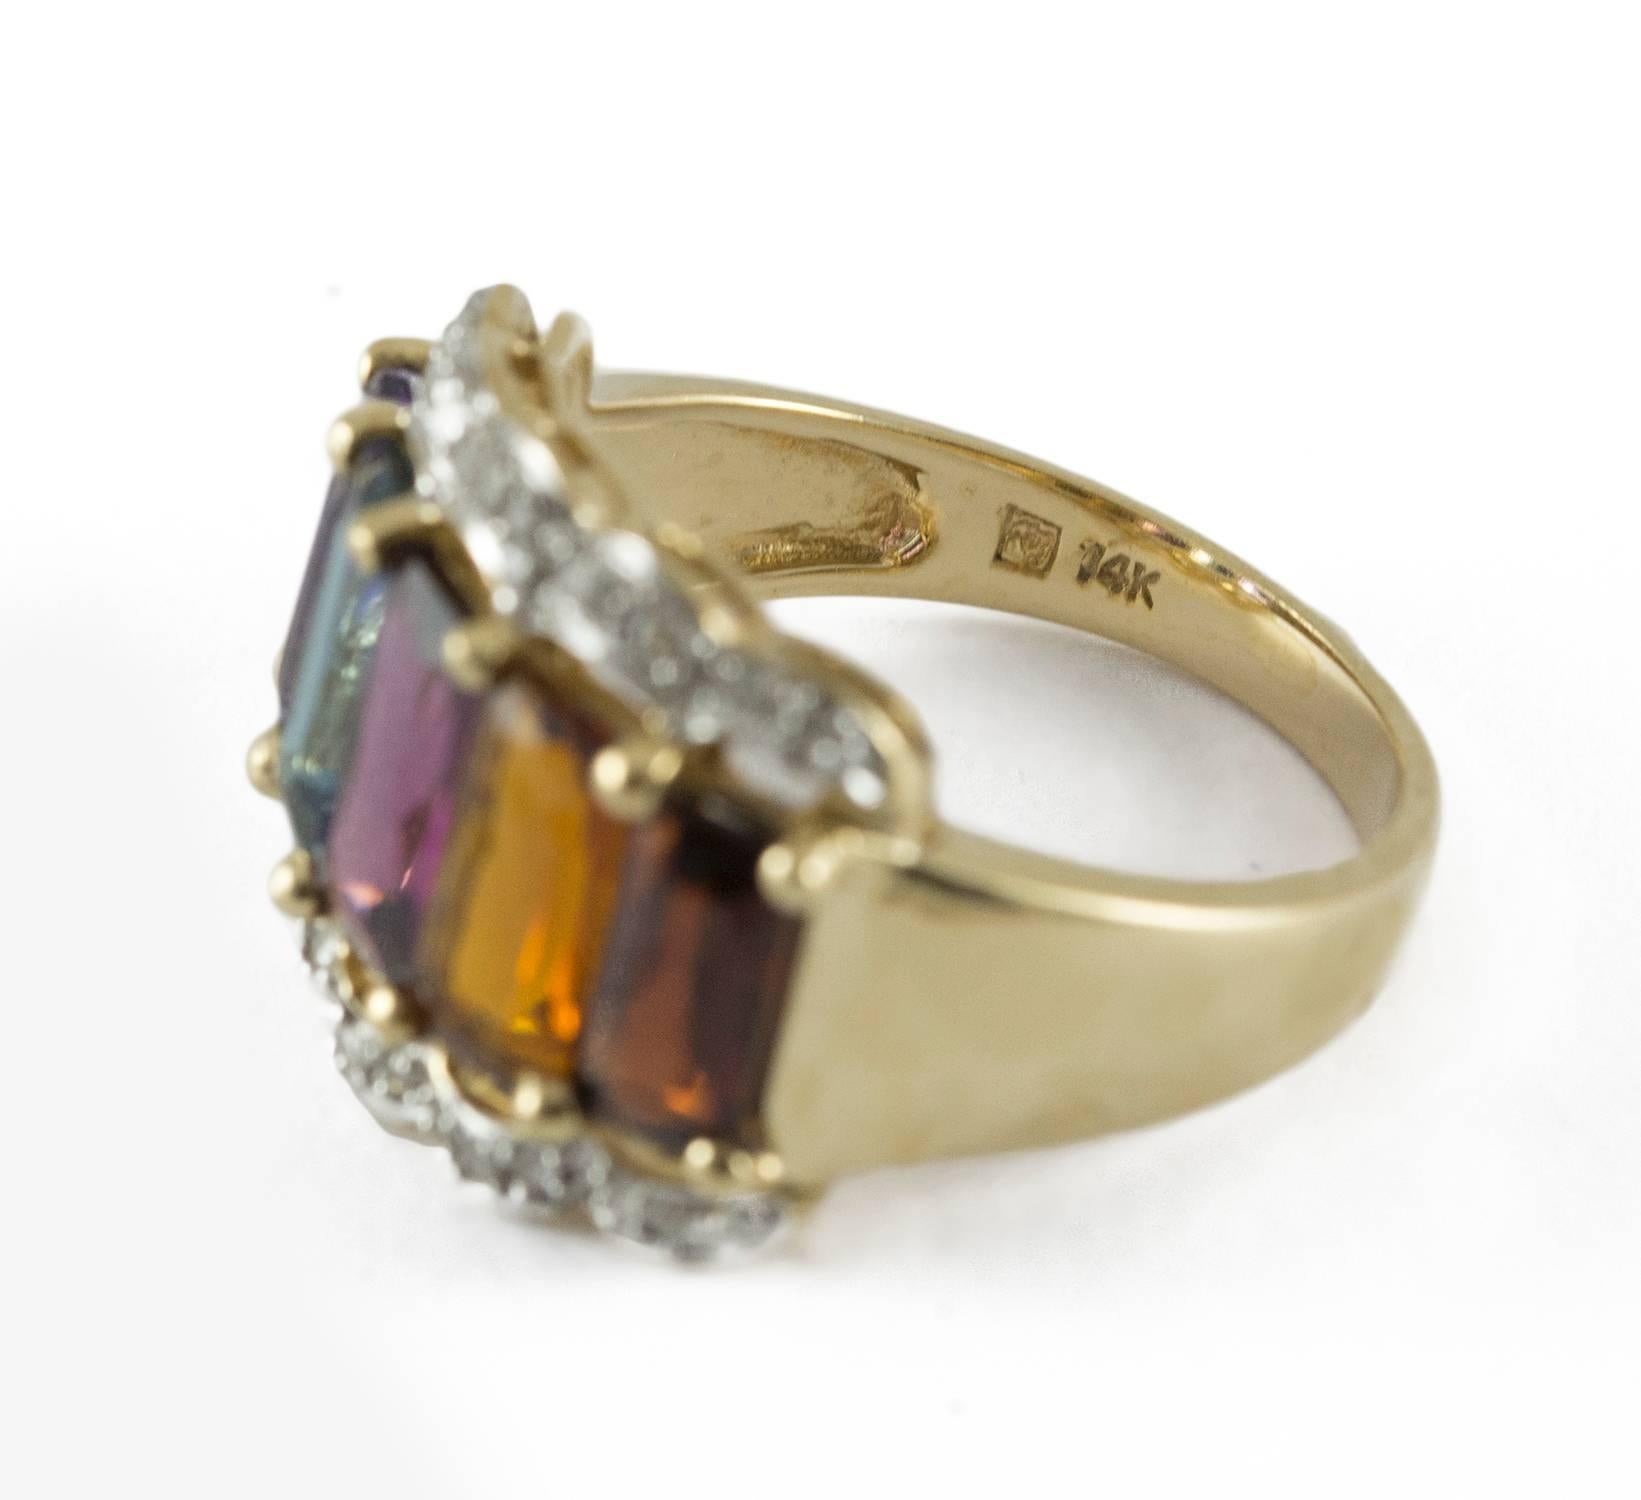 A bright gemstone ring set in 14k white and yellow gold. It holds 5 rectangular mixed cut semi precious stones. (garnet, citrine, tourmaline, topaz and amethyst). The border of the ring is enhanced by 26 round single cut diamonds. This ring is